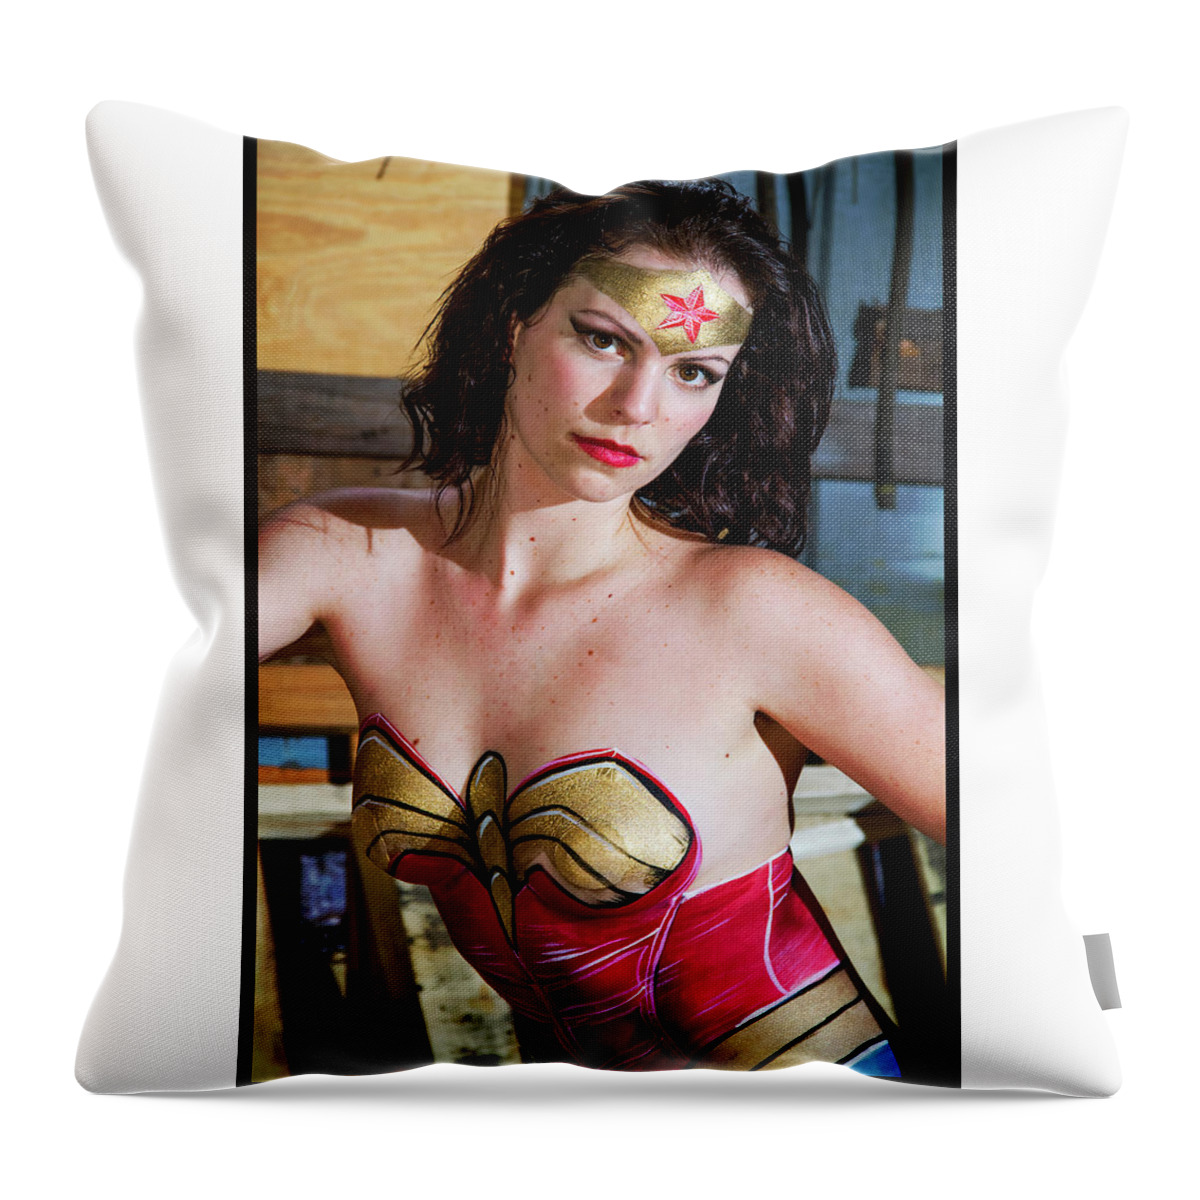 Cosplay Throw Pillow featuring the photograph Wonder Woman by Christopher W Weeks